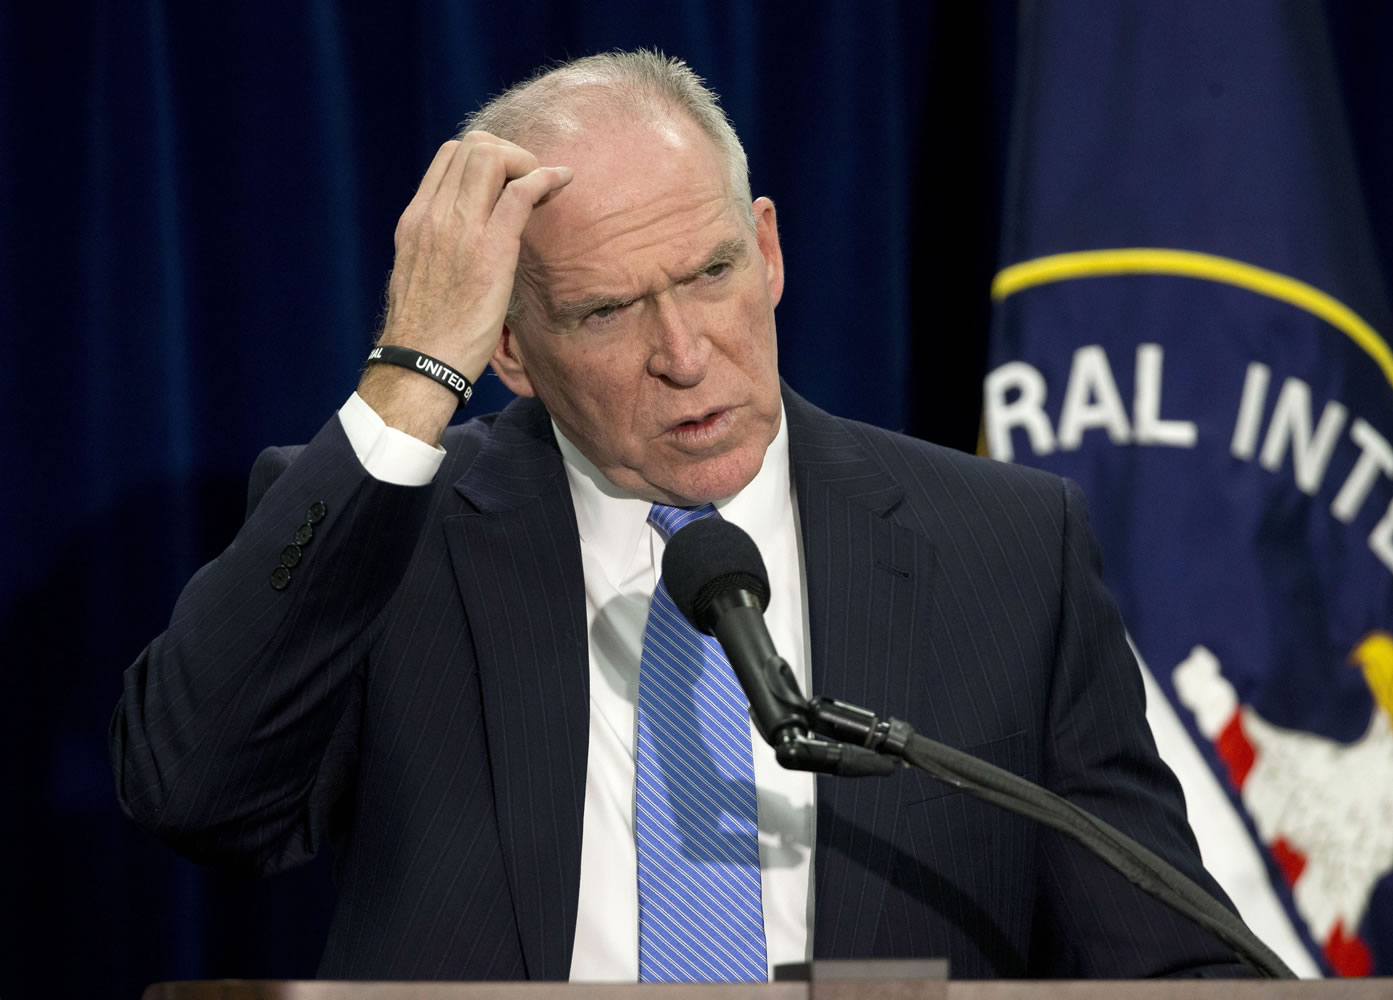 CIA Director John Brennan gestures during a news conference Thursday at CIA headquarters in Langley, Va.